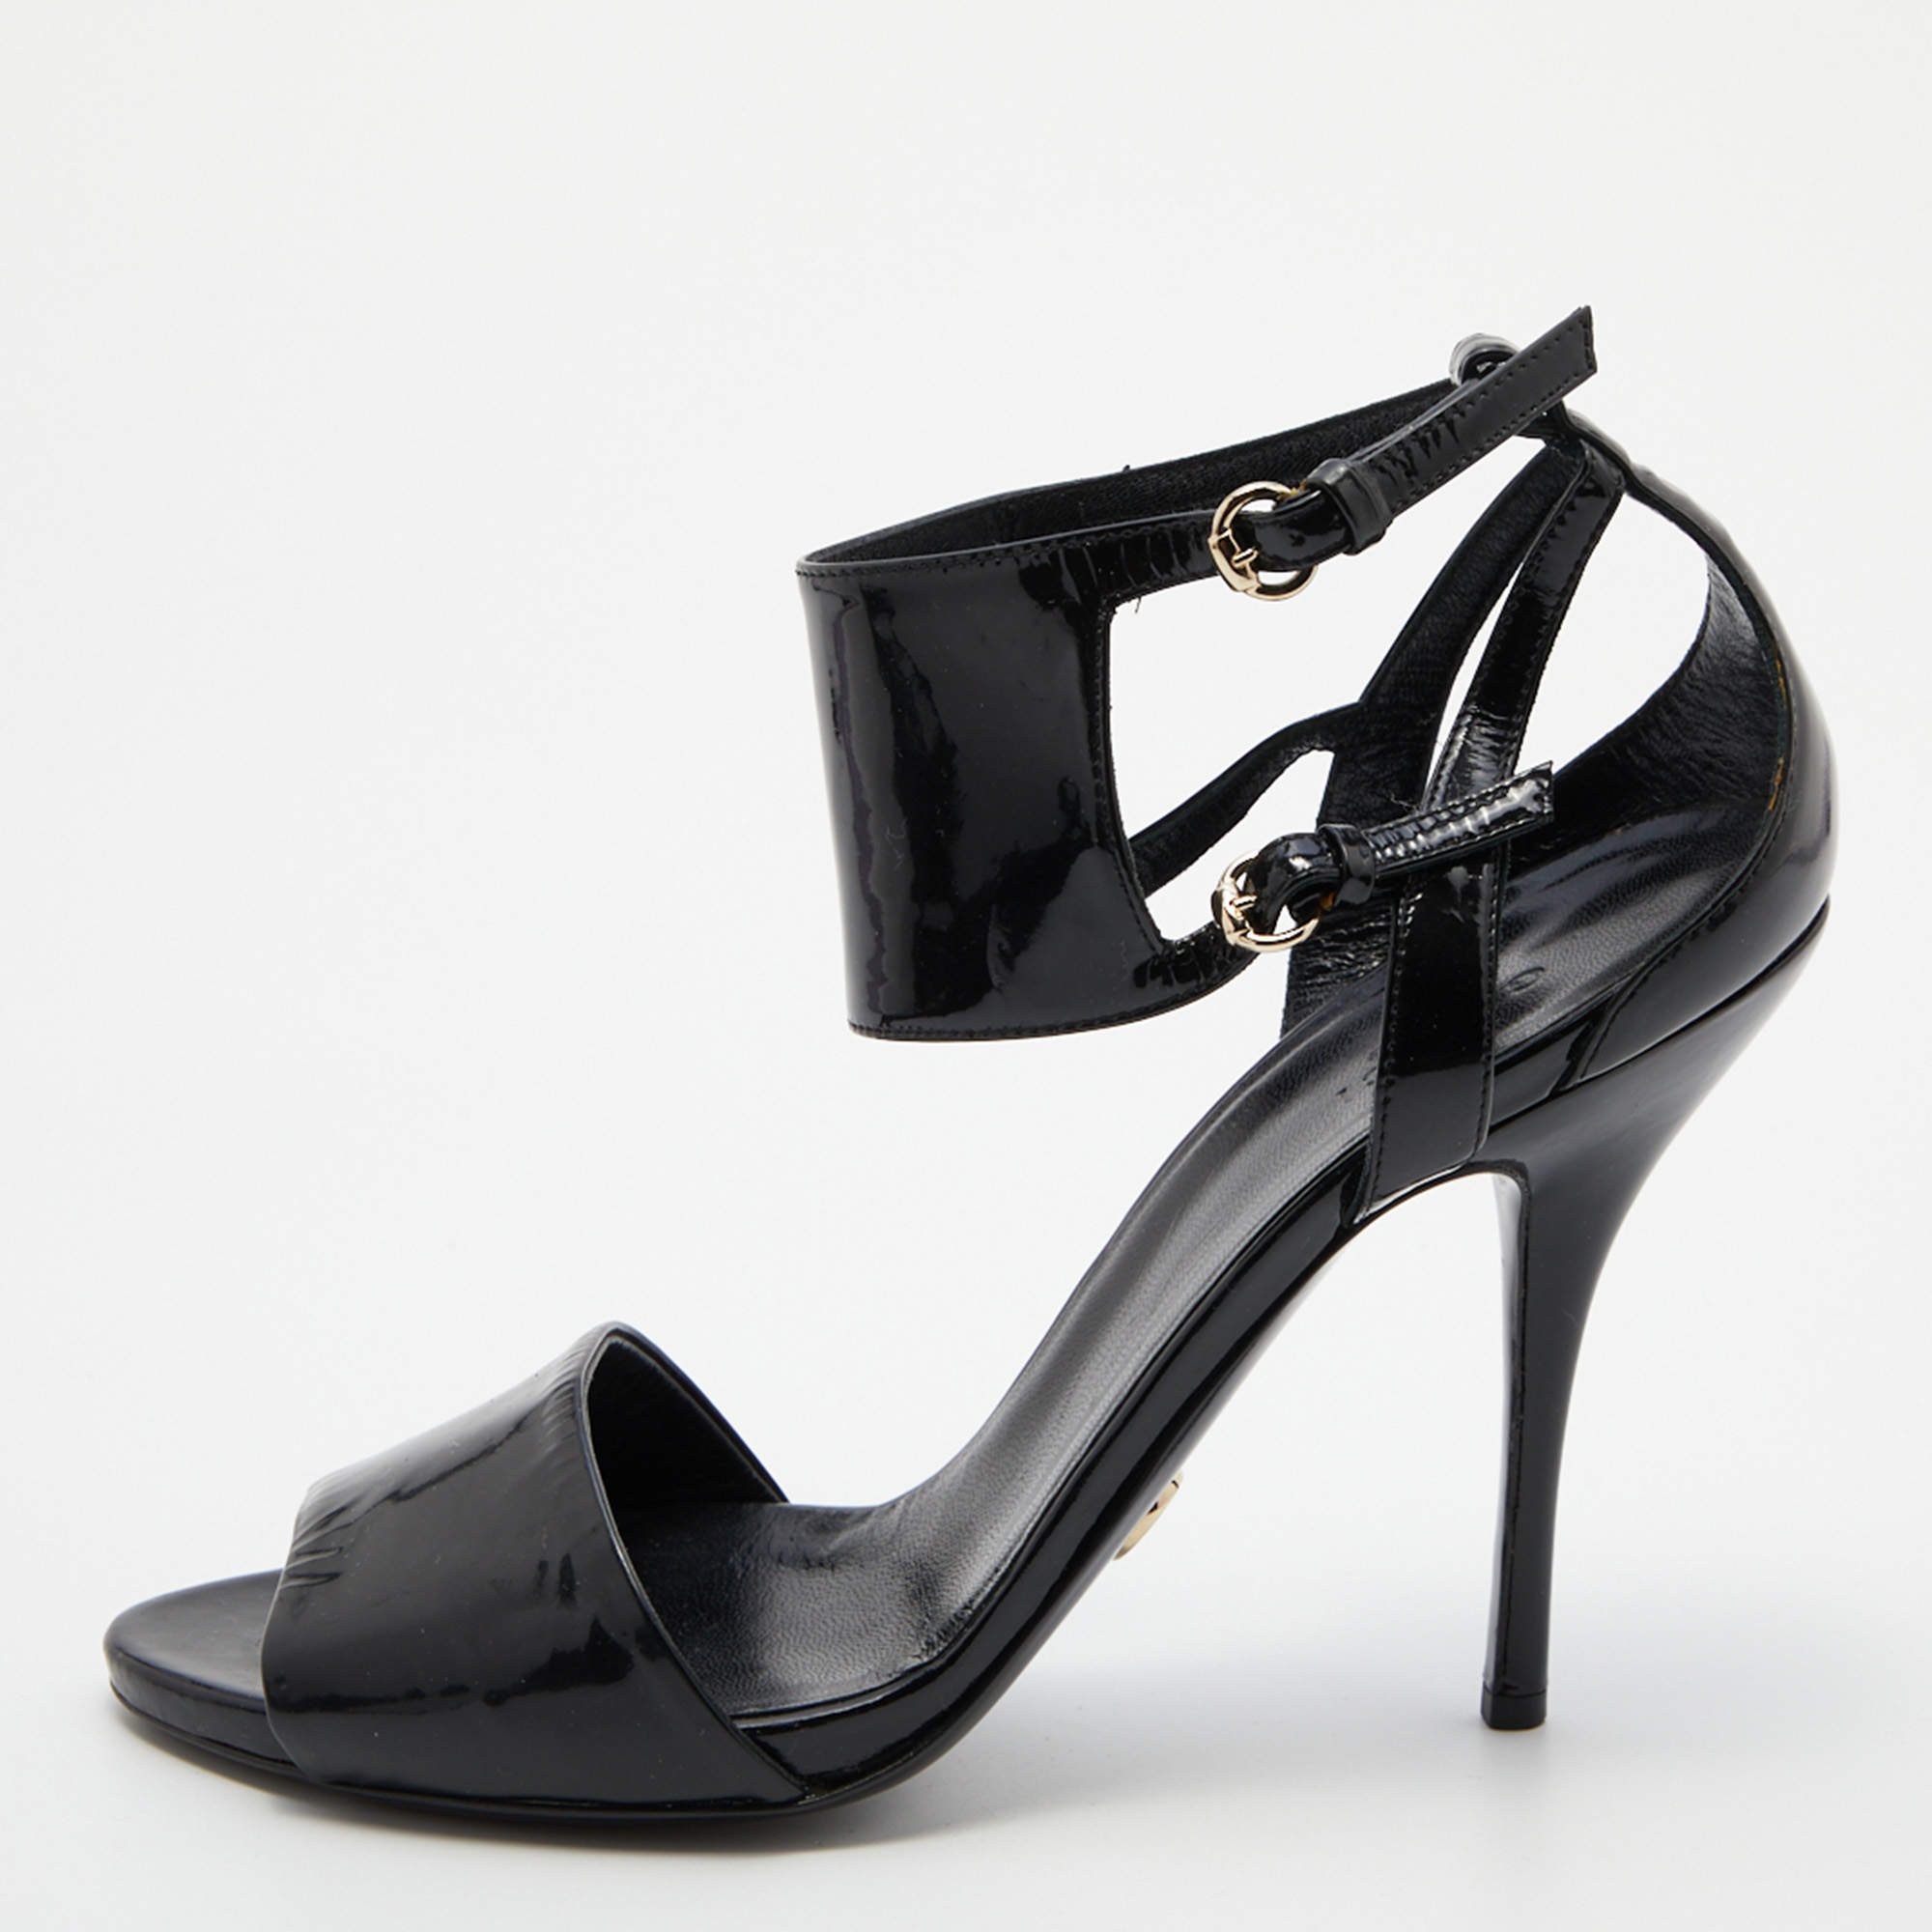 Gucci Black Patent Leather Open Toe Ankle Strap Sandals Size 38.5